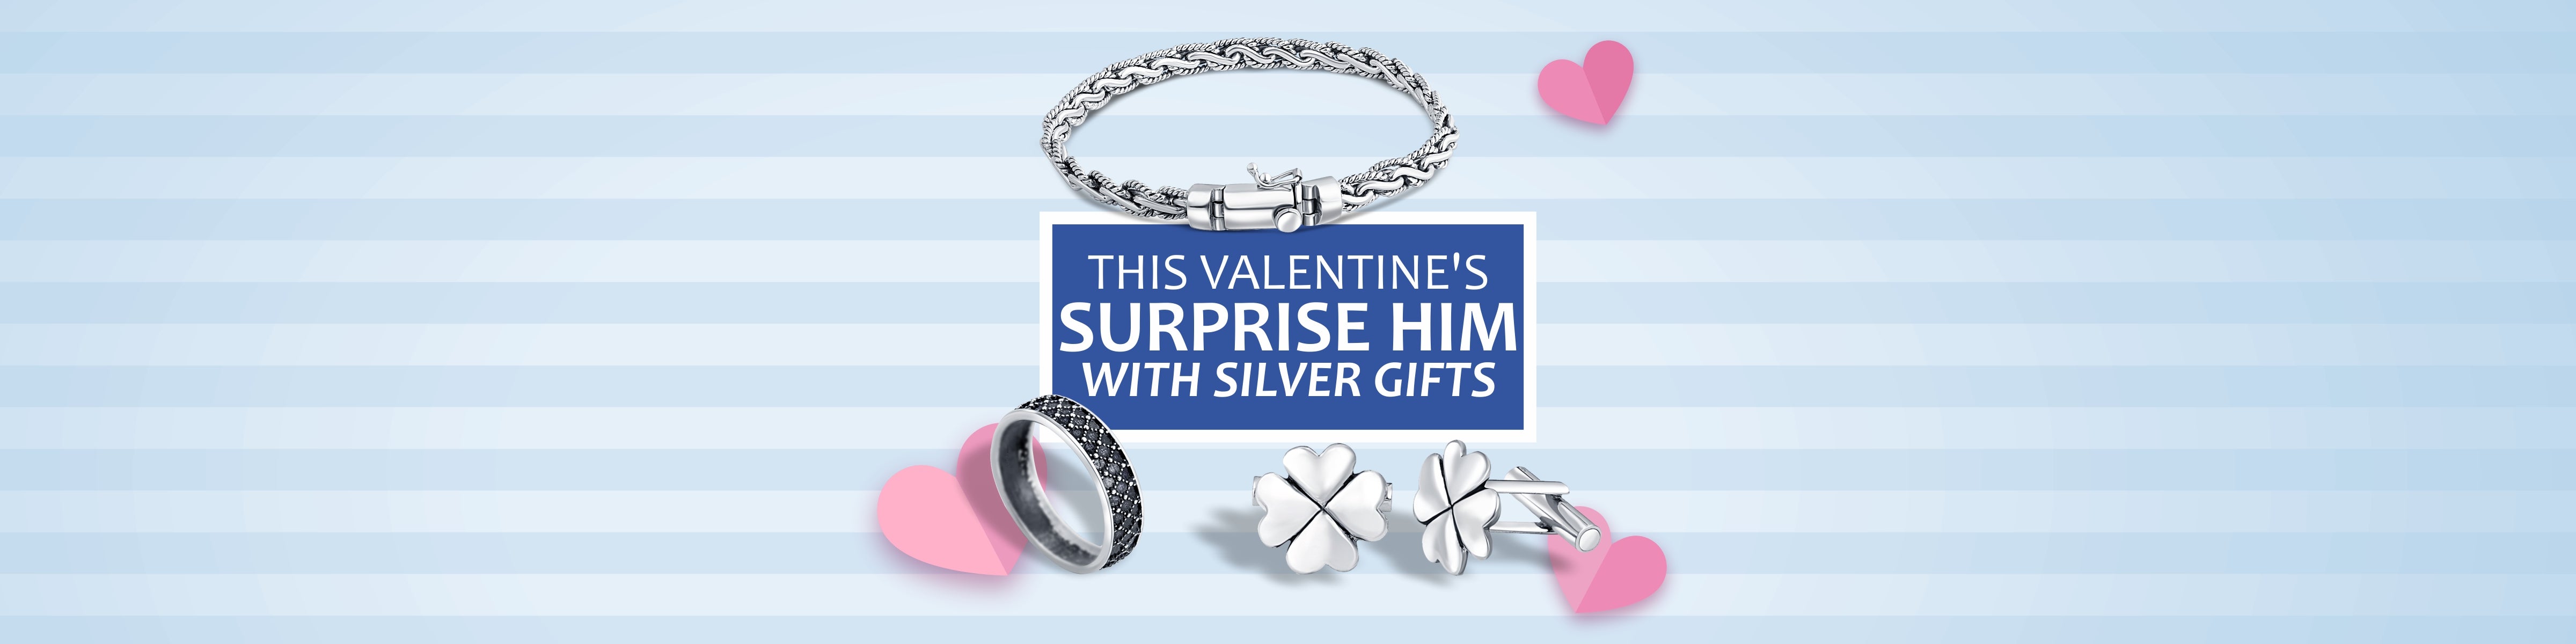 This Valentine's Surprise Him with Silver Gifts by Raajraani